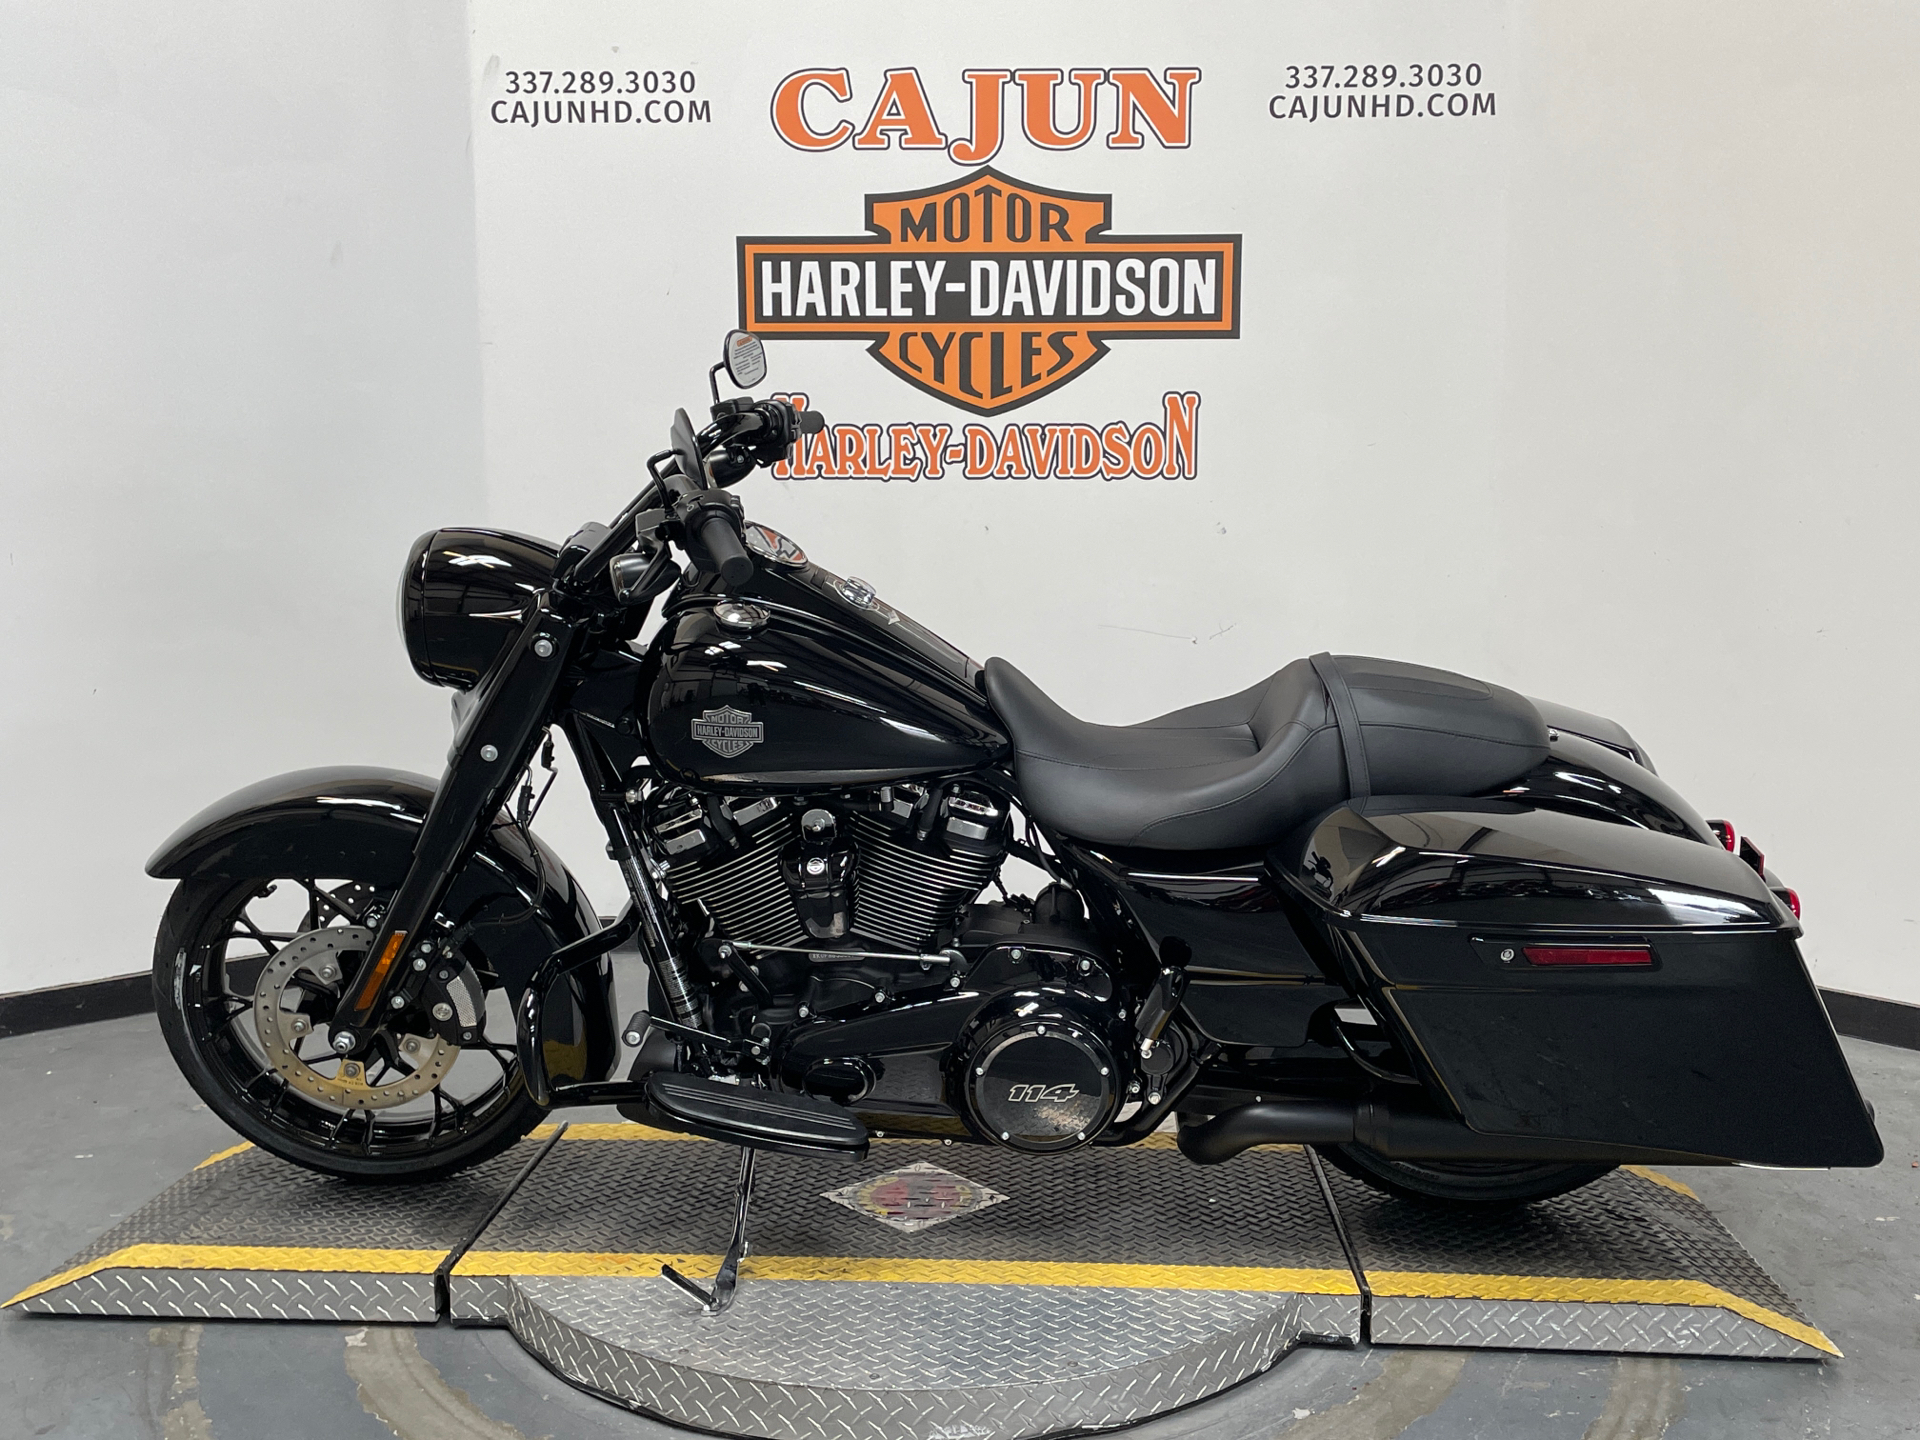 2022 Harley-Davidson Road King Special Lafayette - Photo 4